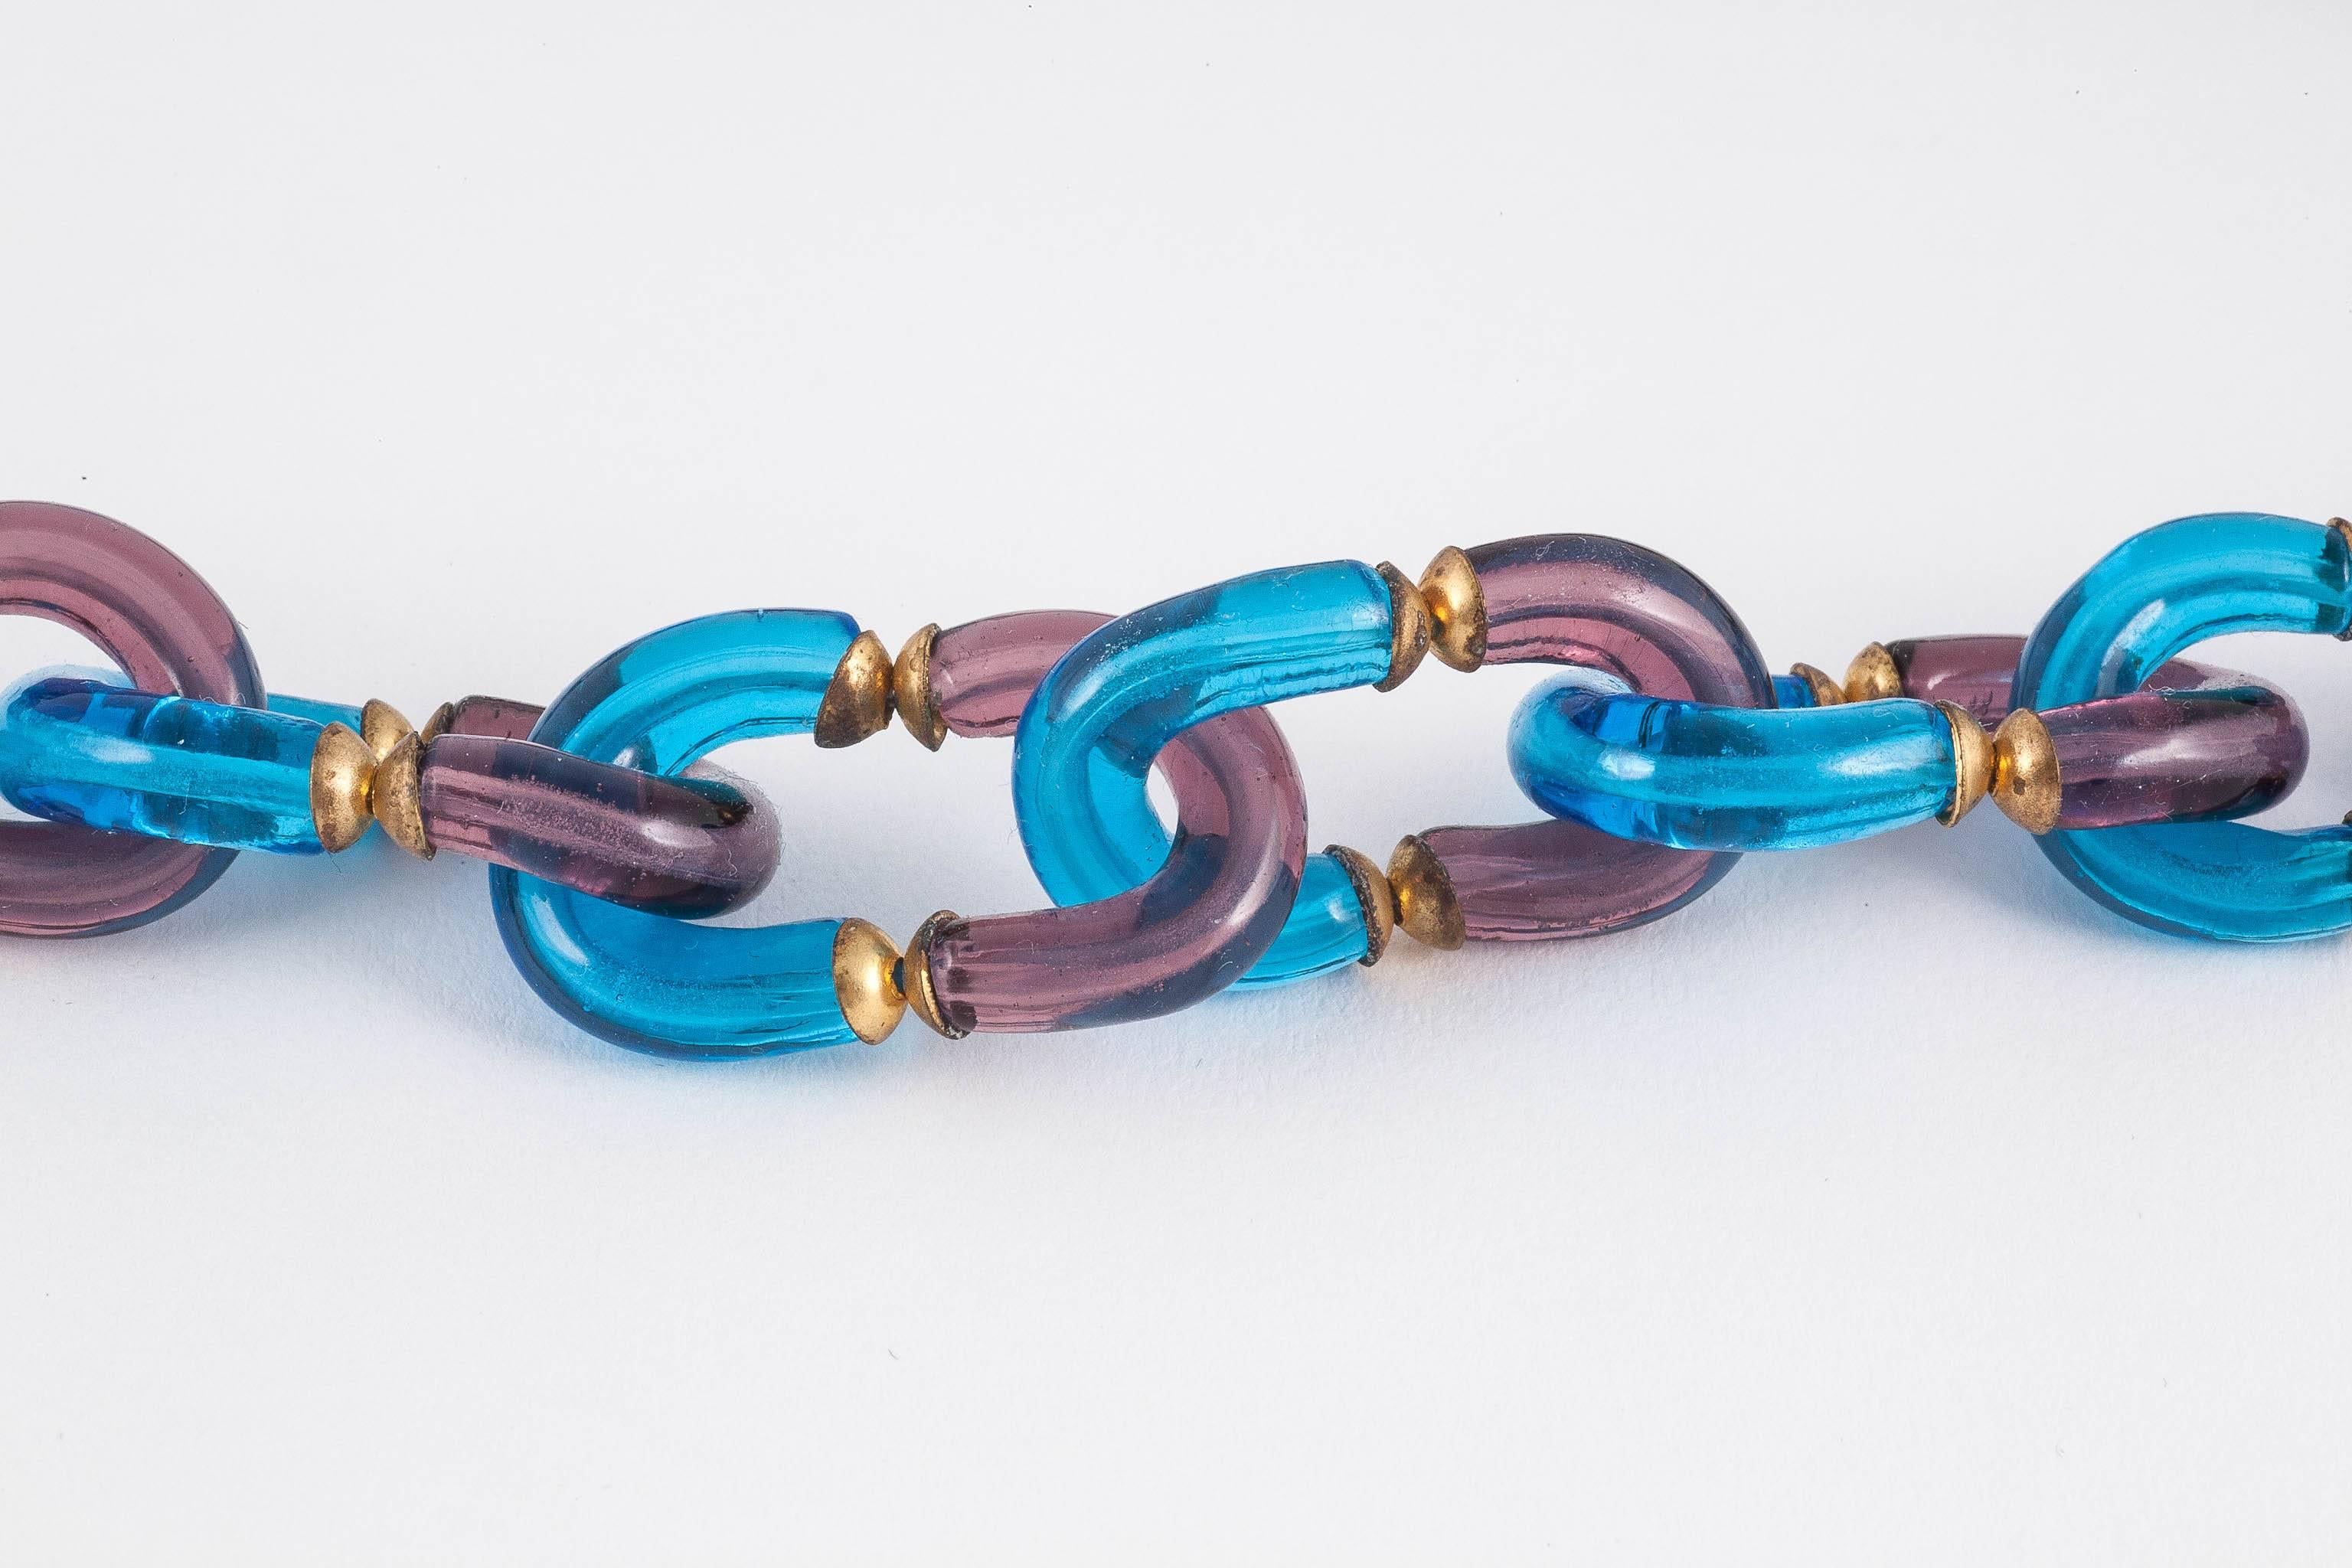 This is a brilliantly coloured example of glass and brass linked chain of the model made for Chanel by Seguso. However, this one is not signed, so we do not know for whom this piece was made. Never the less, it is a beautiful example, the unusual